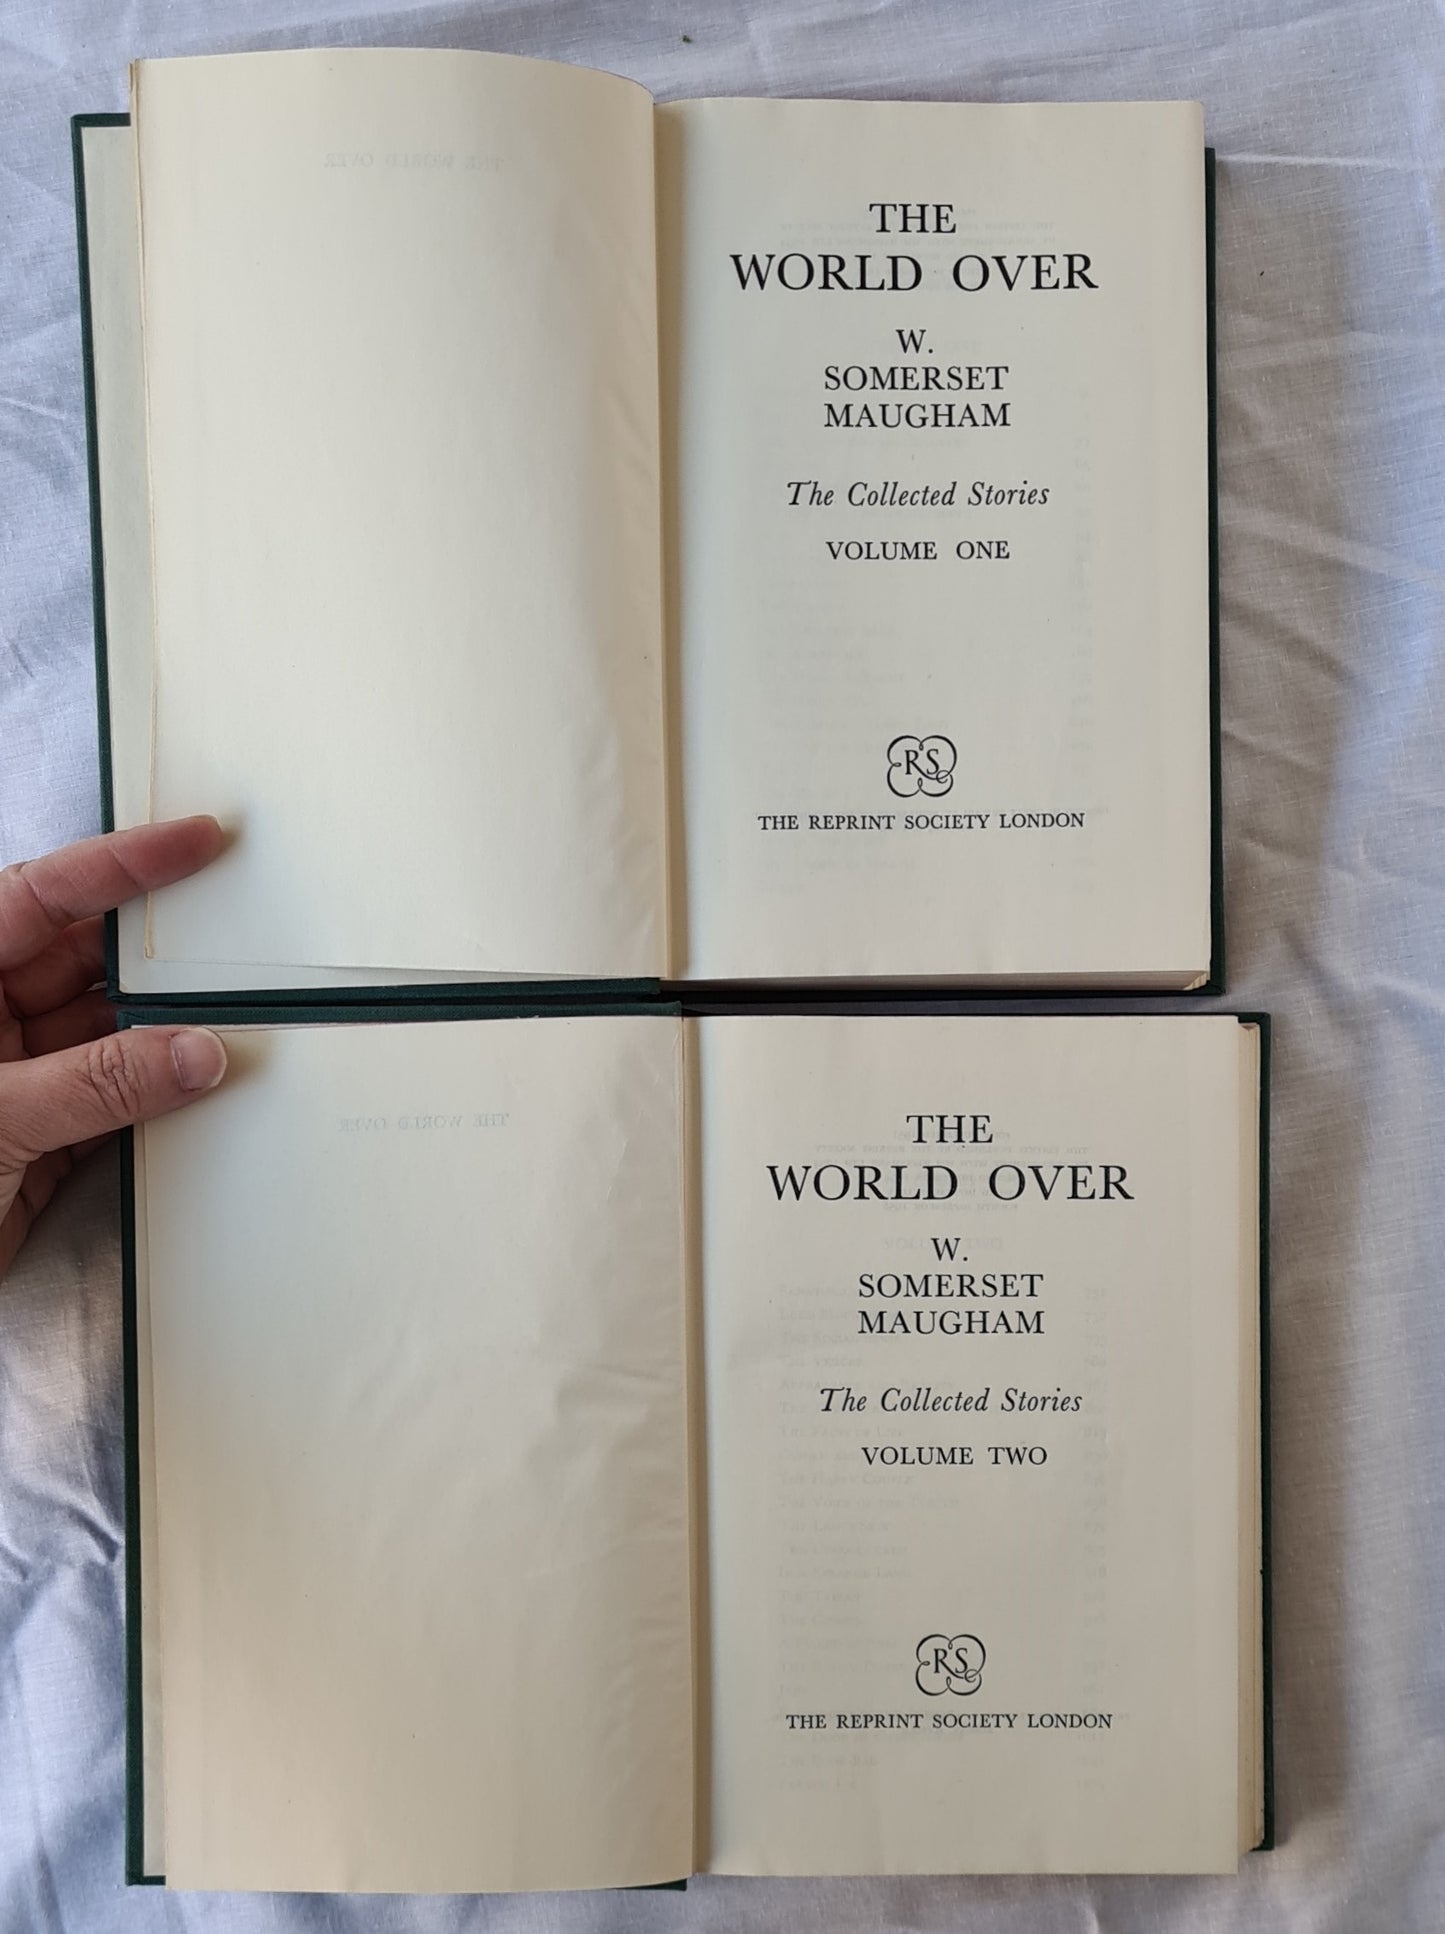 The World Over by W. Somerset Maugham